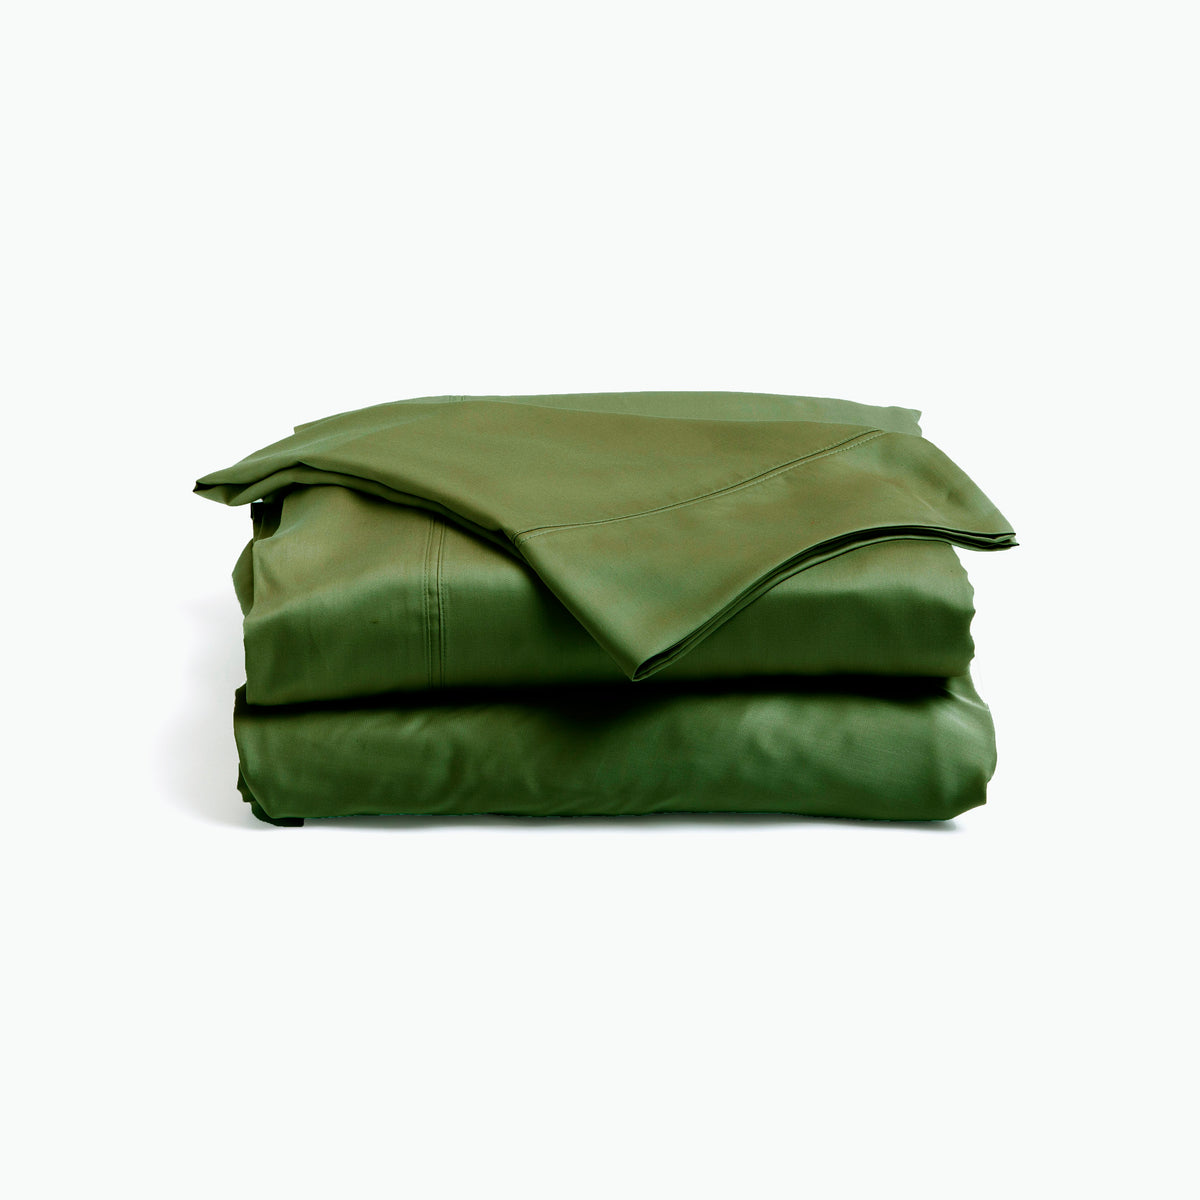 Image showcasing entire Moss Recovery Viscose Sheet Set all neatly folded on top of one another with a white background. The image shows (from top to bottom): pillowcase, flat sheet, fitted sheet